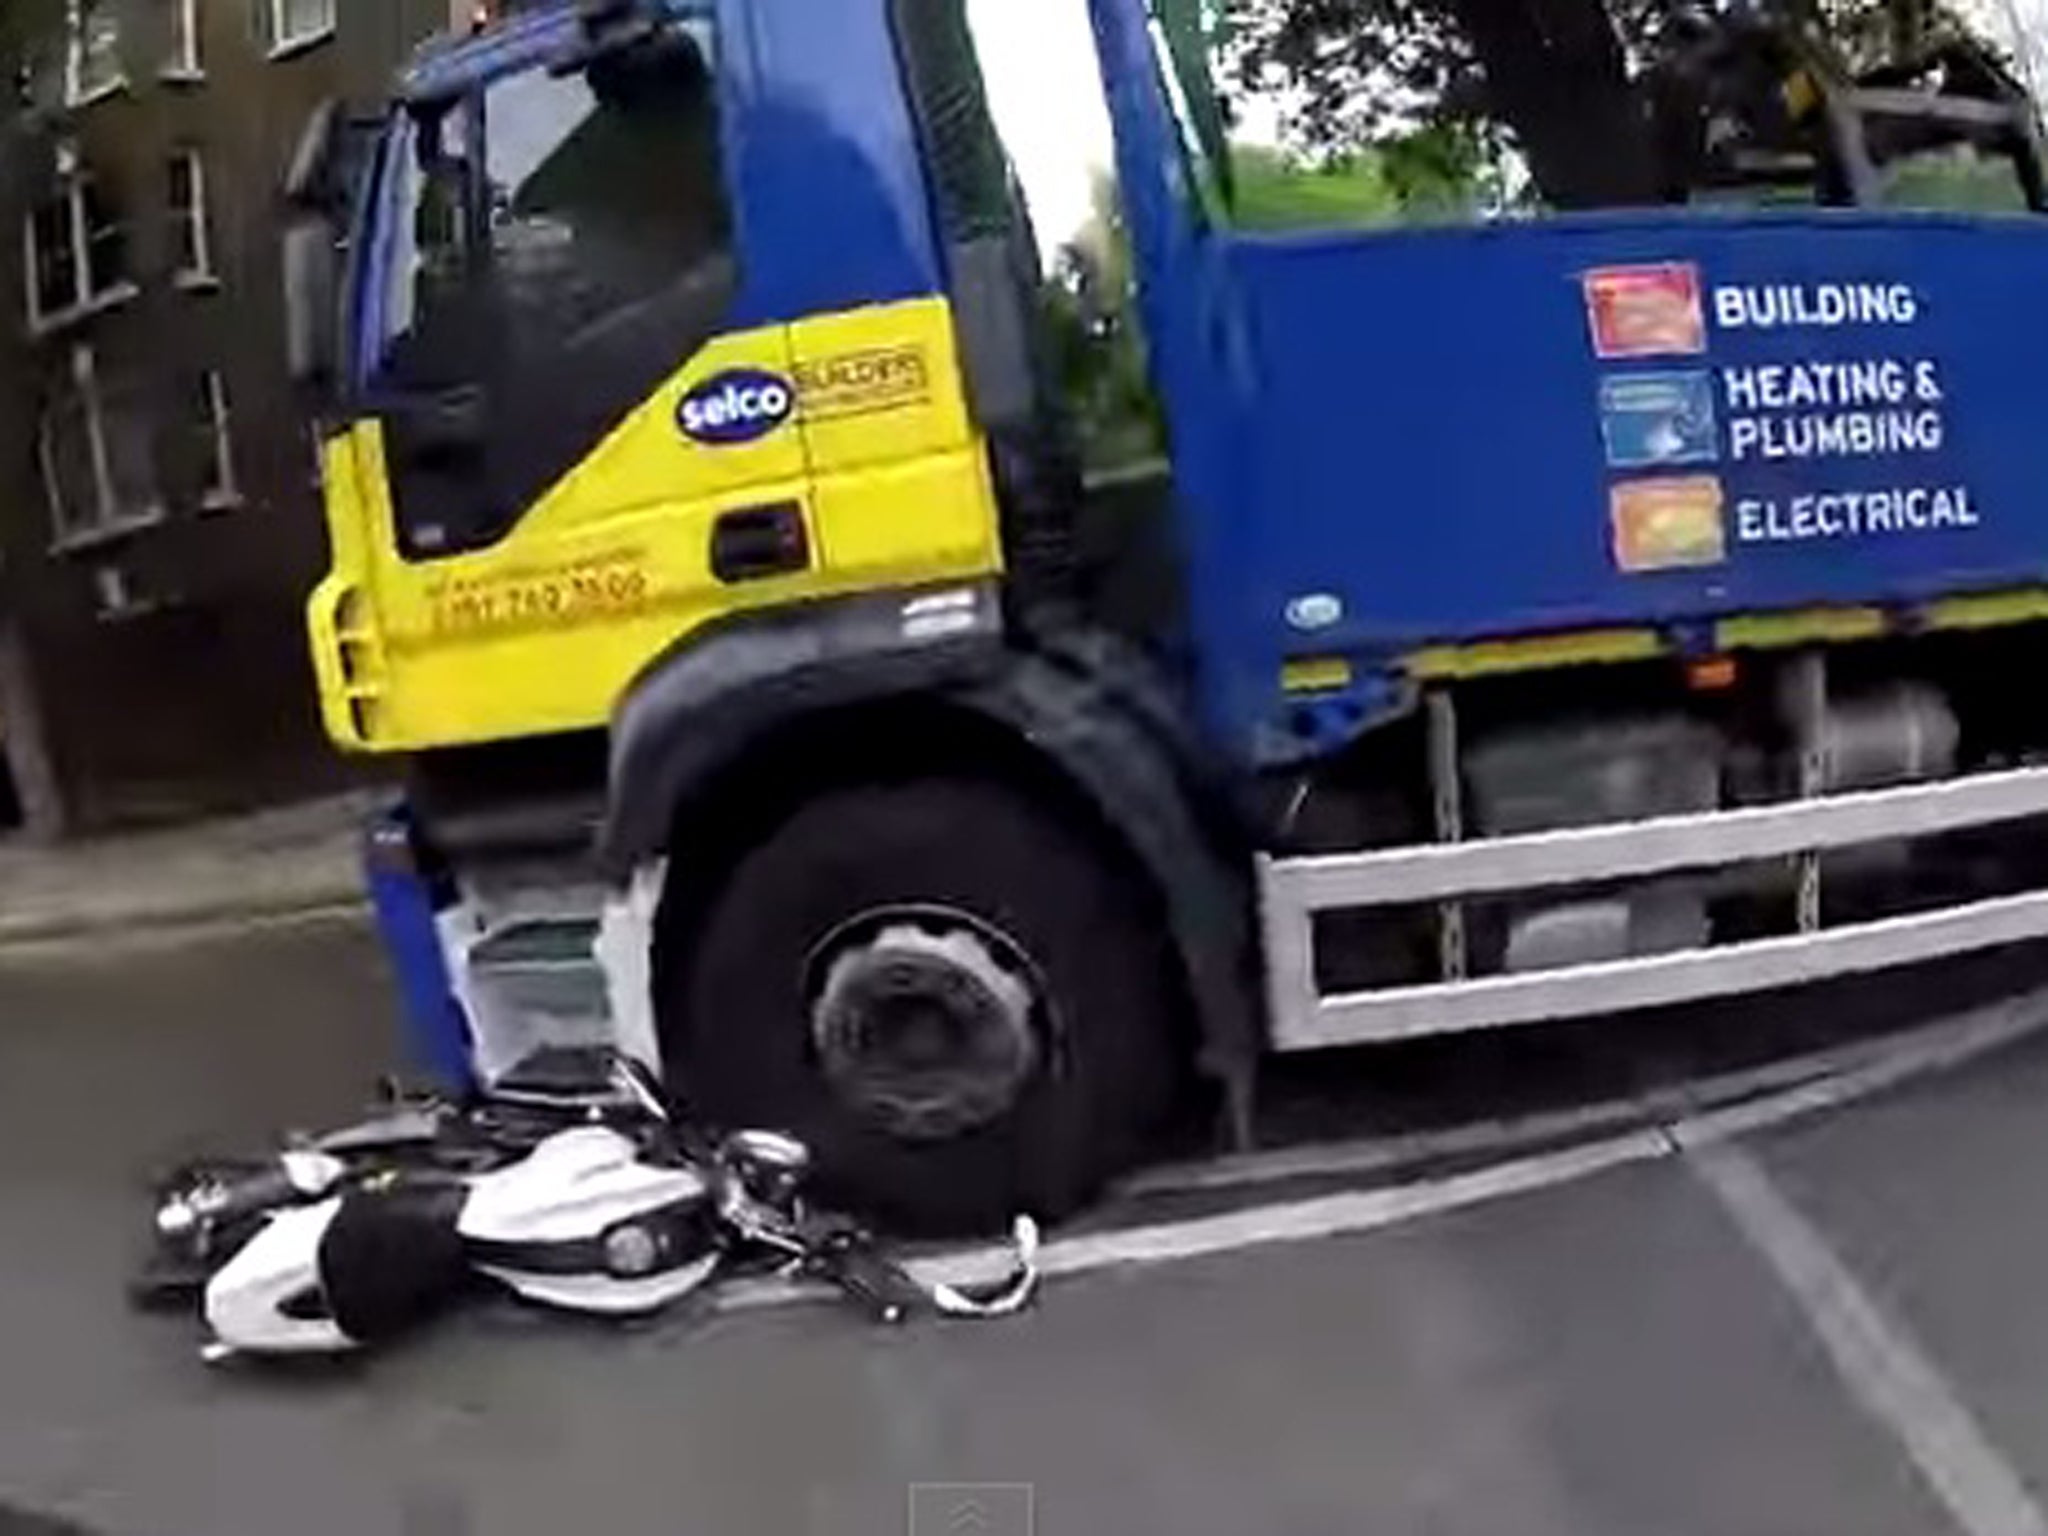 Helmet footage shows lucky escape as lorry driver fails to spot motorcyclist